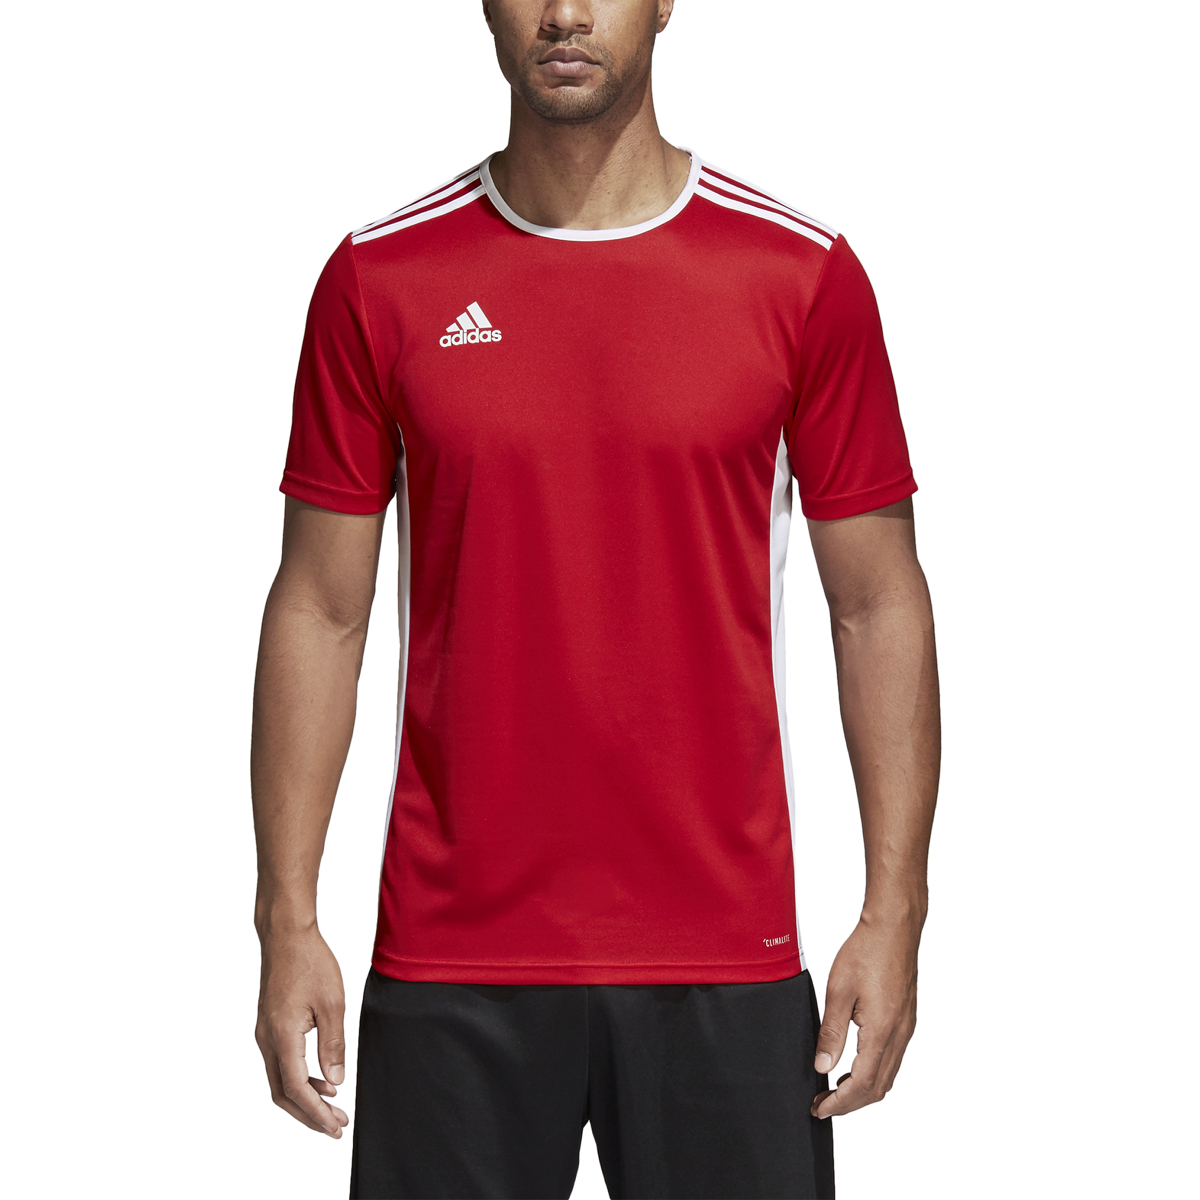 Men's Adidas Entrada 18 Soccer Jersey Red/White - XS - image 1 of 6